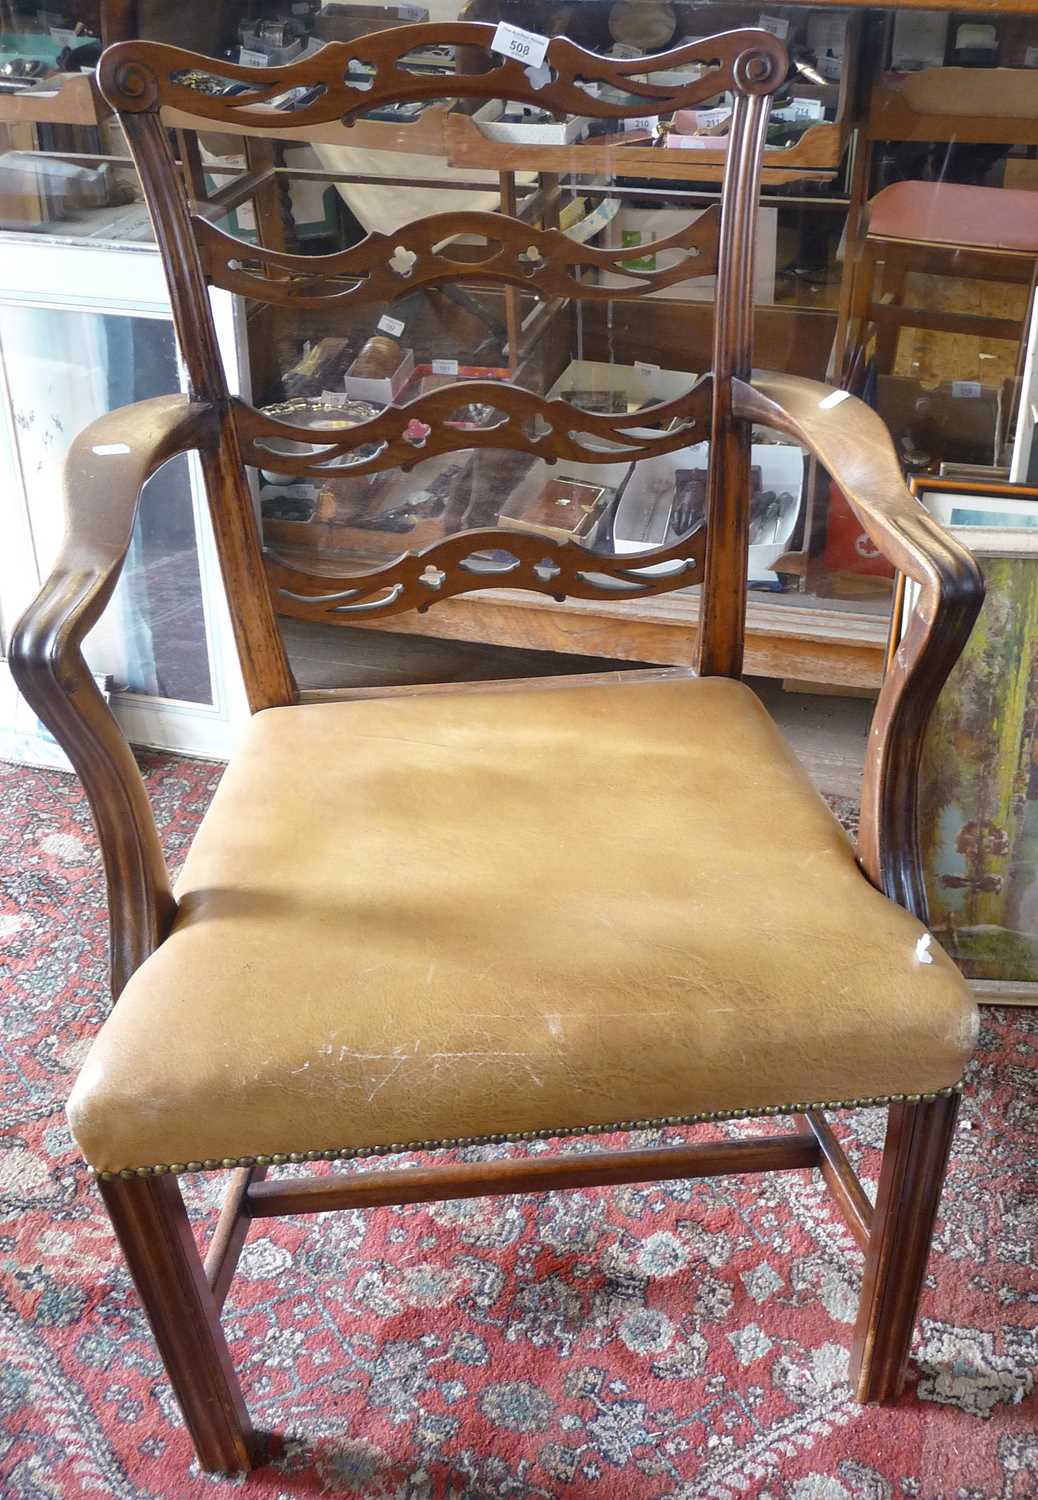 Reproduction mahogany Chippendale style carver chair